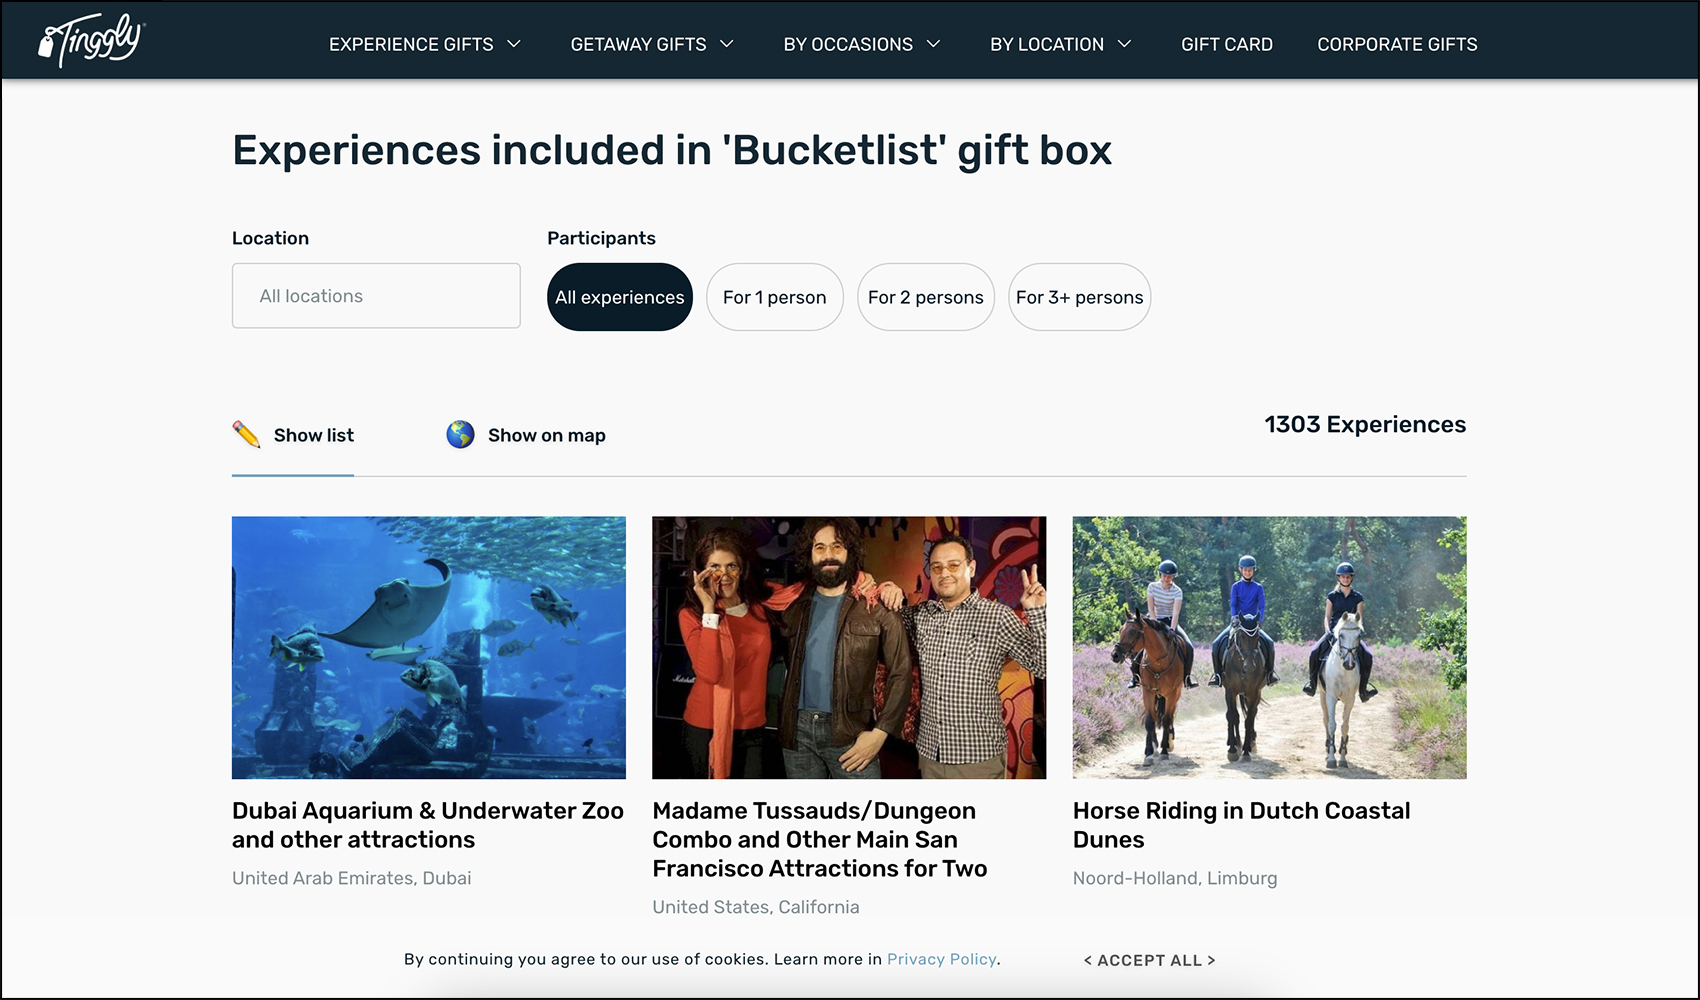 Corporate gifting company Tinggly’s Buckletlist box includes thousands of experiences to choose from. We discuss specific examples below. 